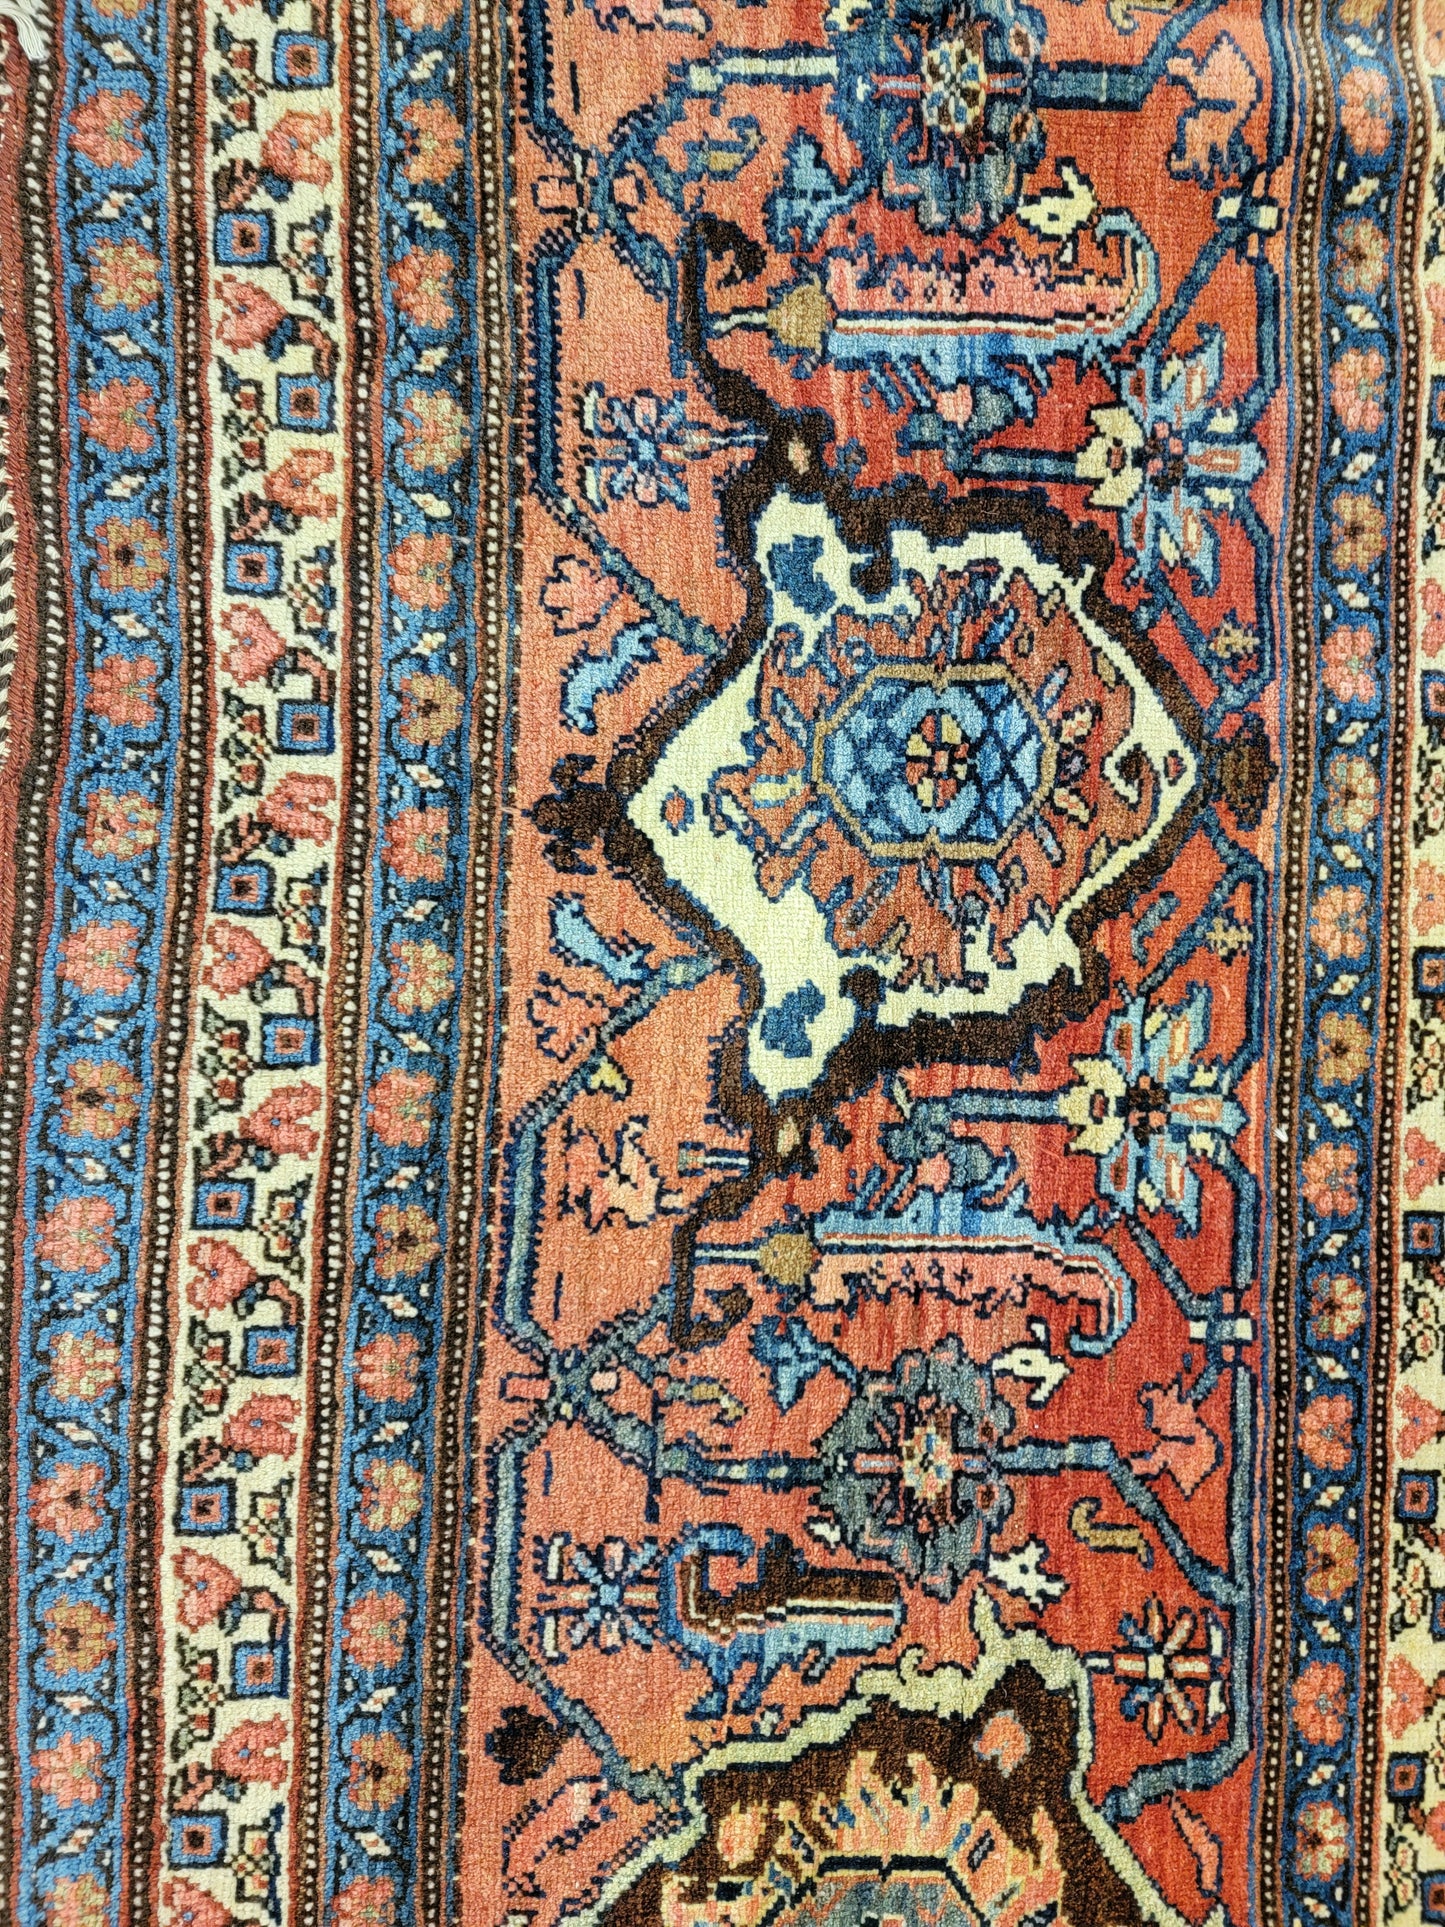 Antique Hand-Knotted Wool Area Rug Bijar Collectible 14'11" x 25'